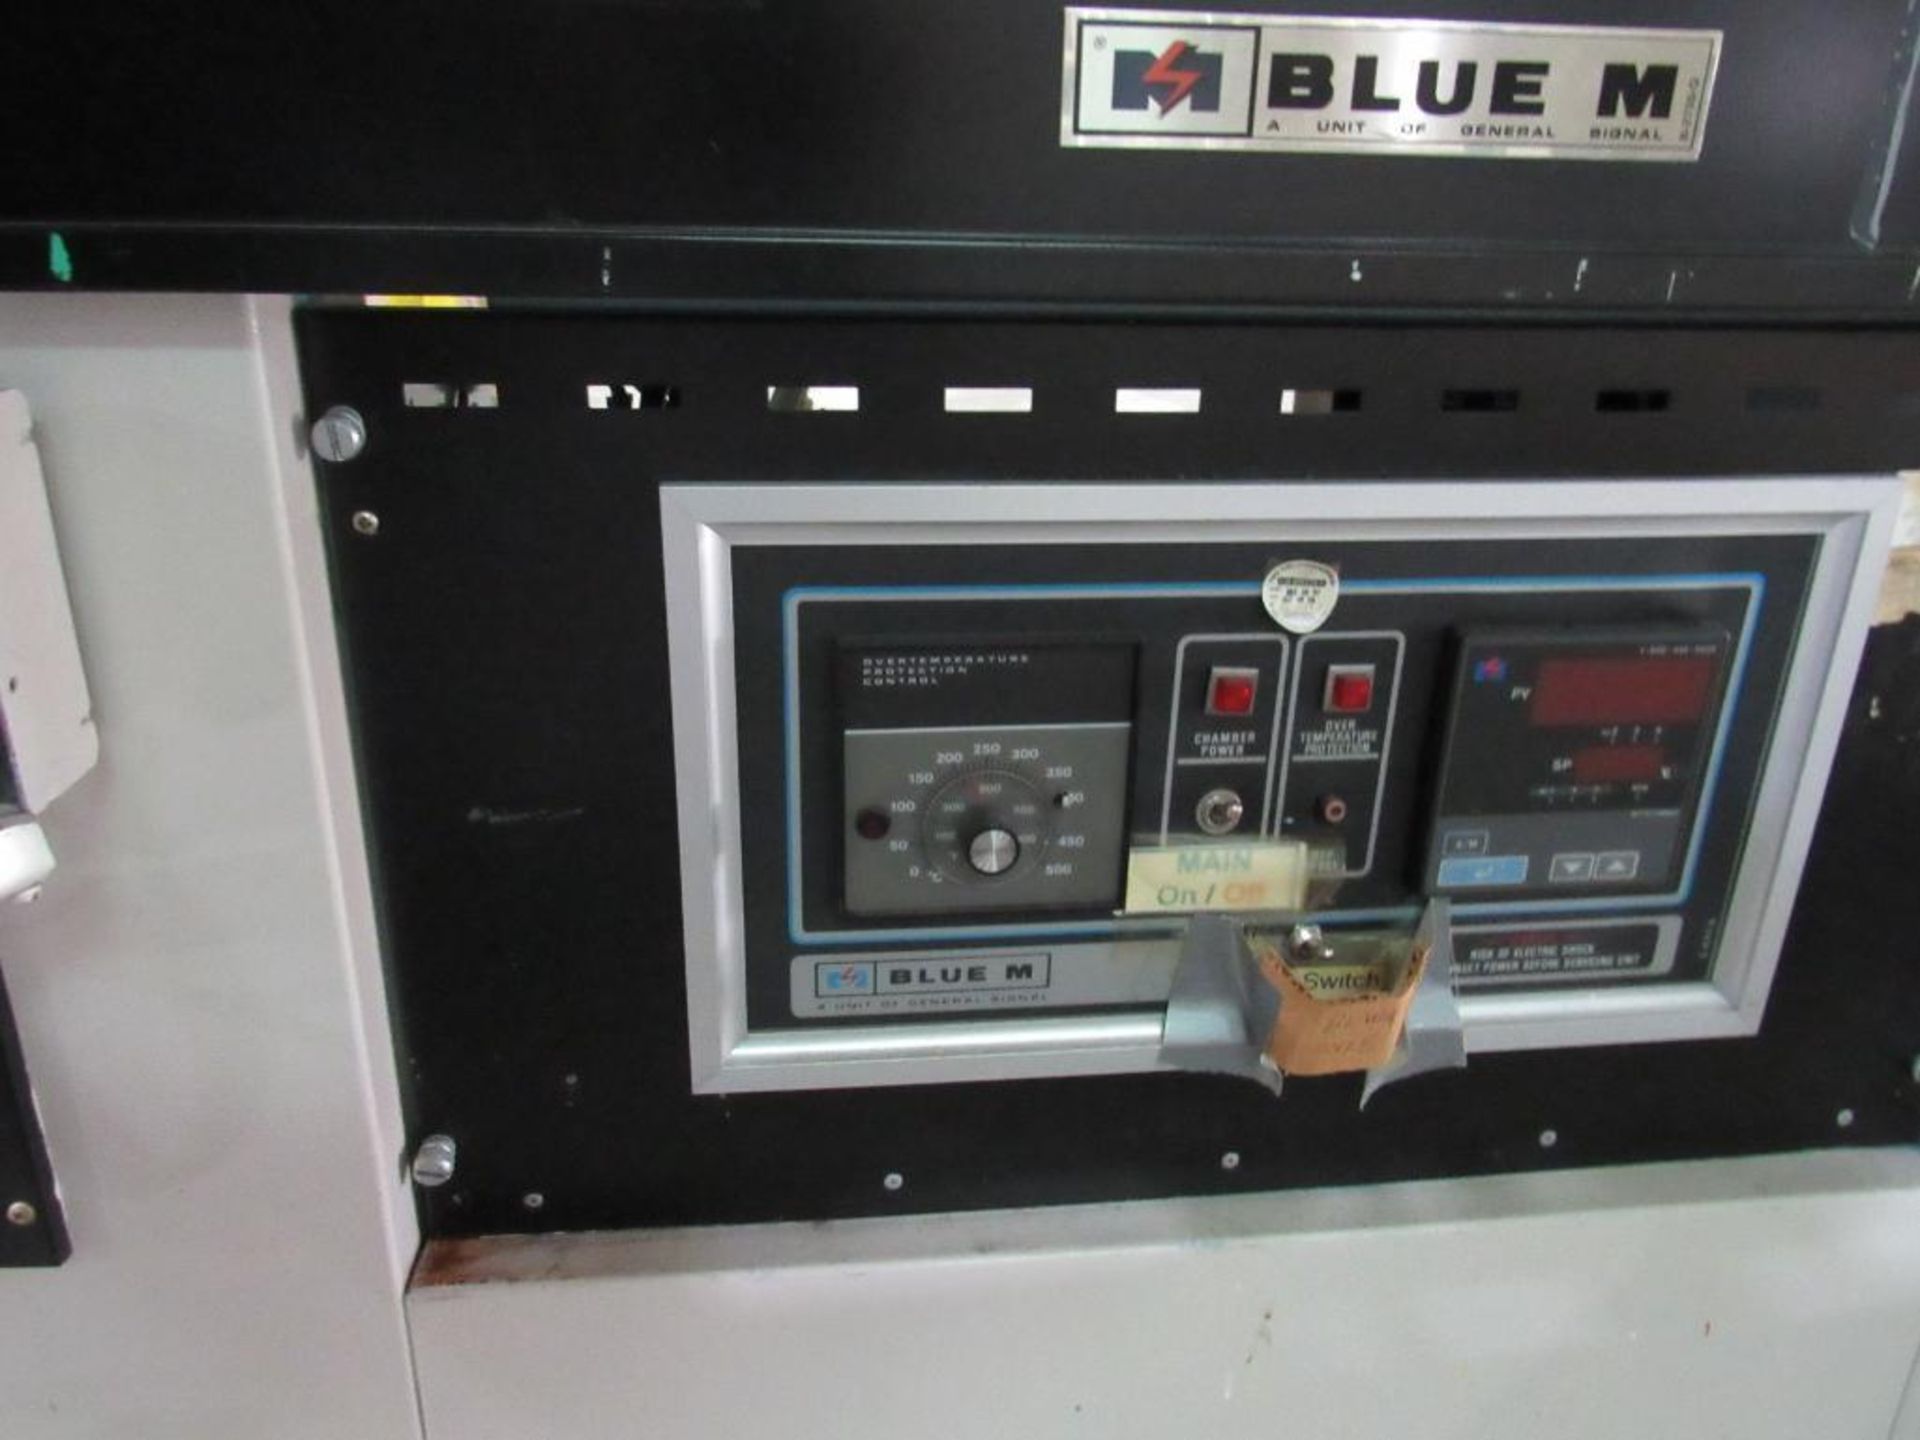 Blue M Electric Double-Door Batch Oven Model DC1506C, S/N DC6692 (LOCATED IN SOUTH MILWAUKEE, WI) - Image 3 of 4